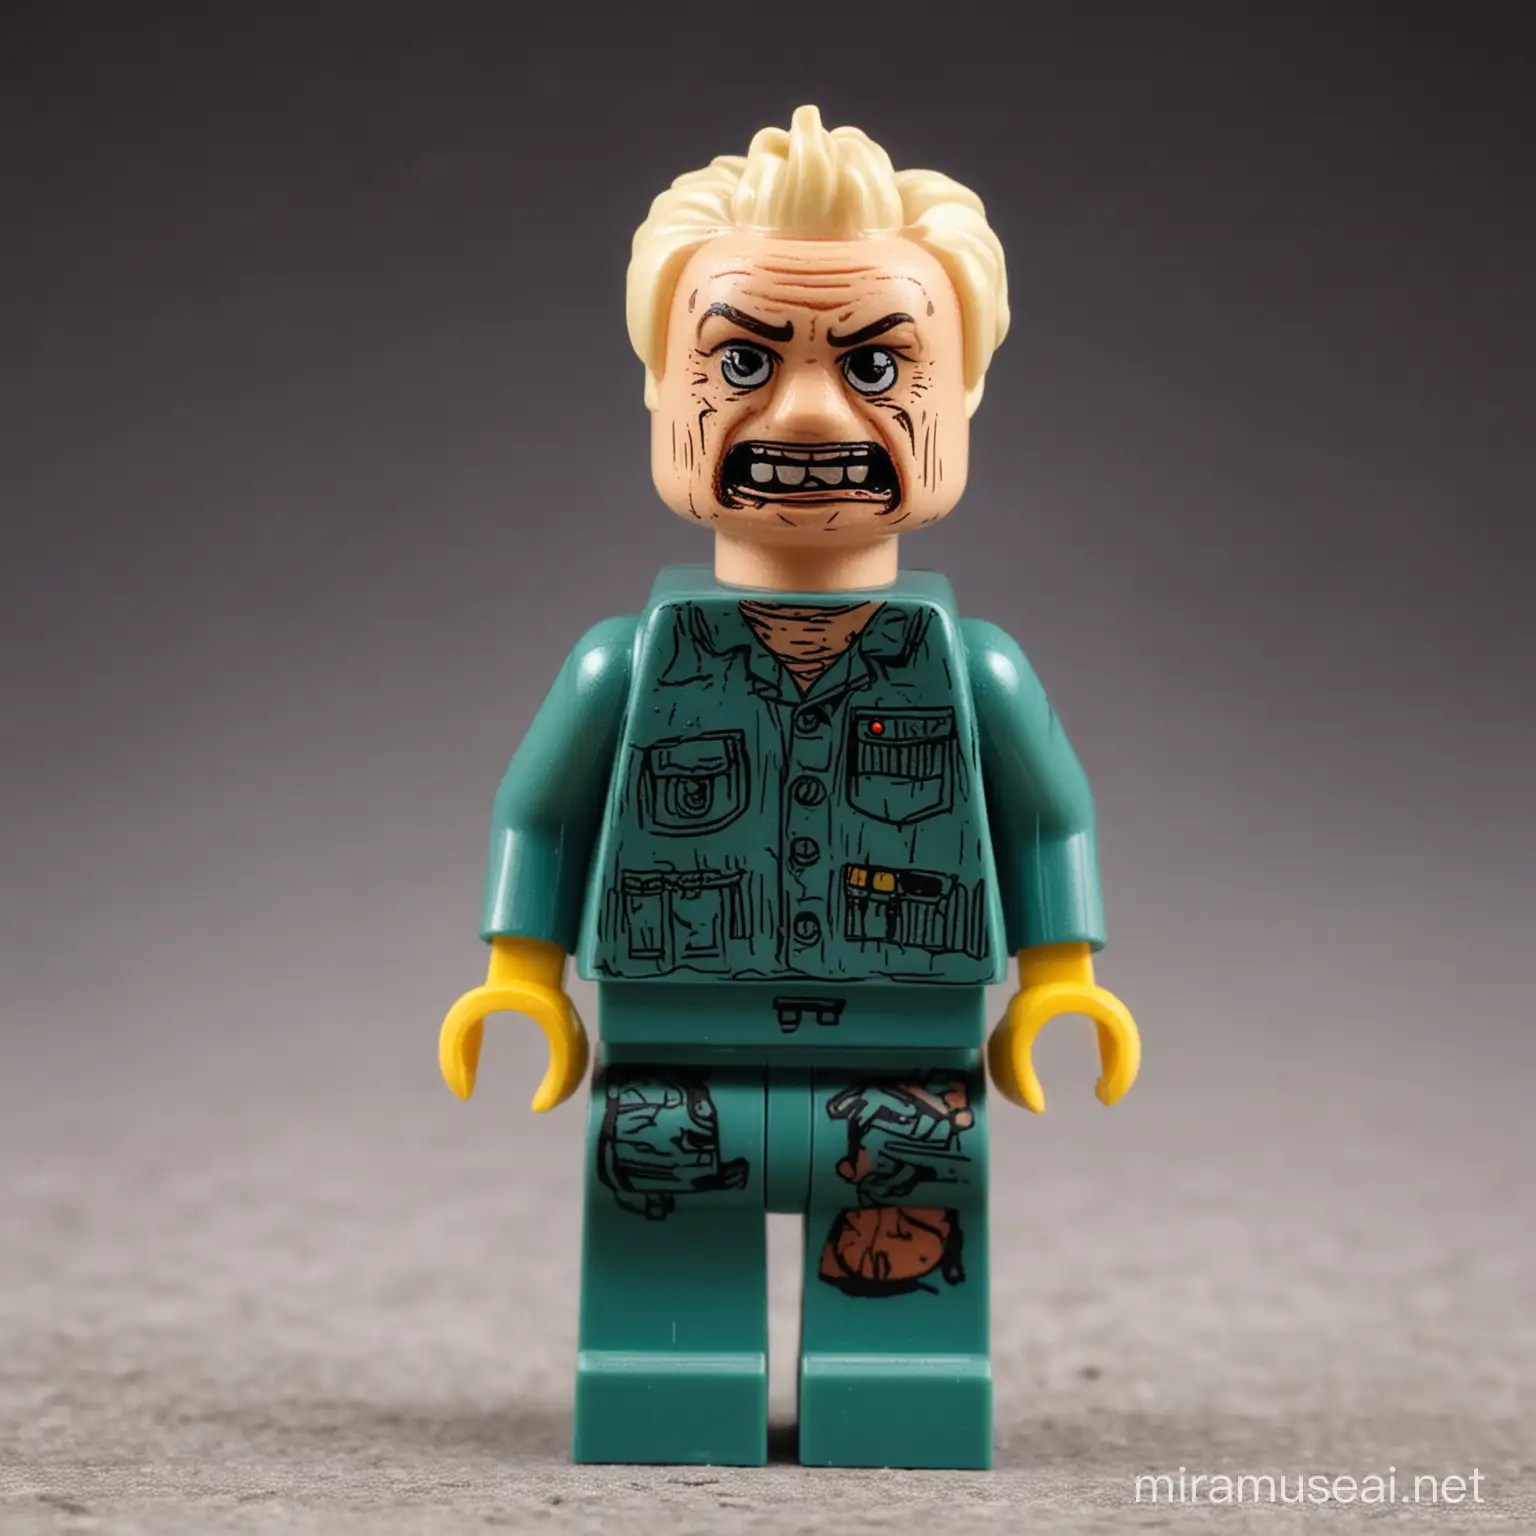 Struggling Meth Addict Lego Minifigure with Scabby Face and Neglected Appearance